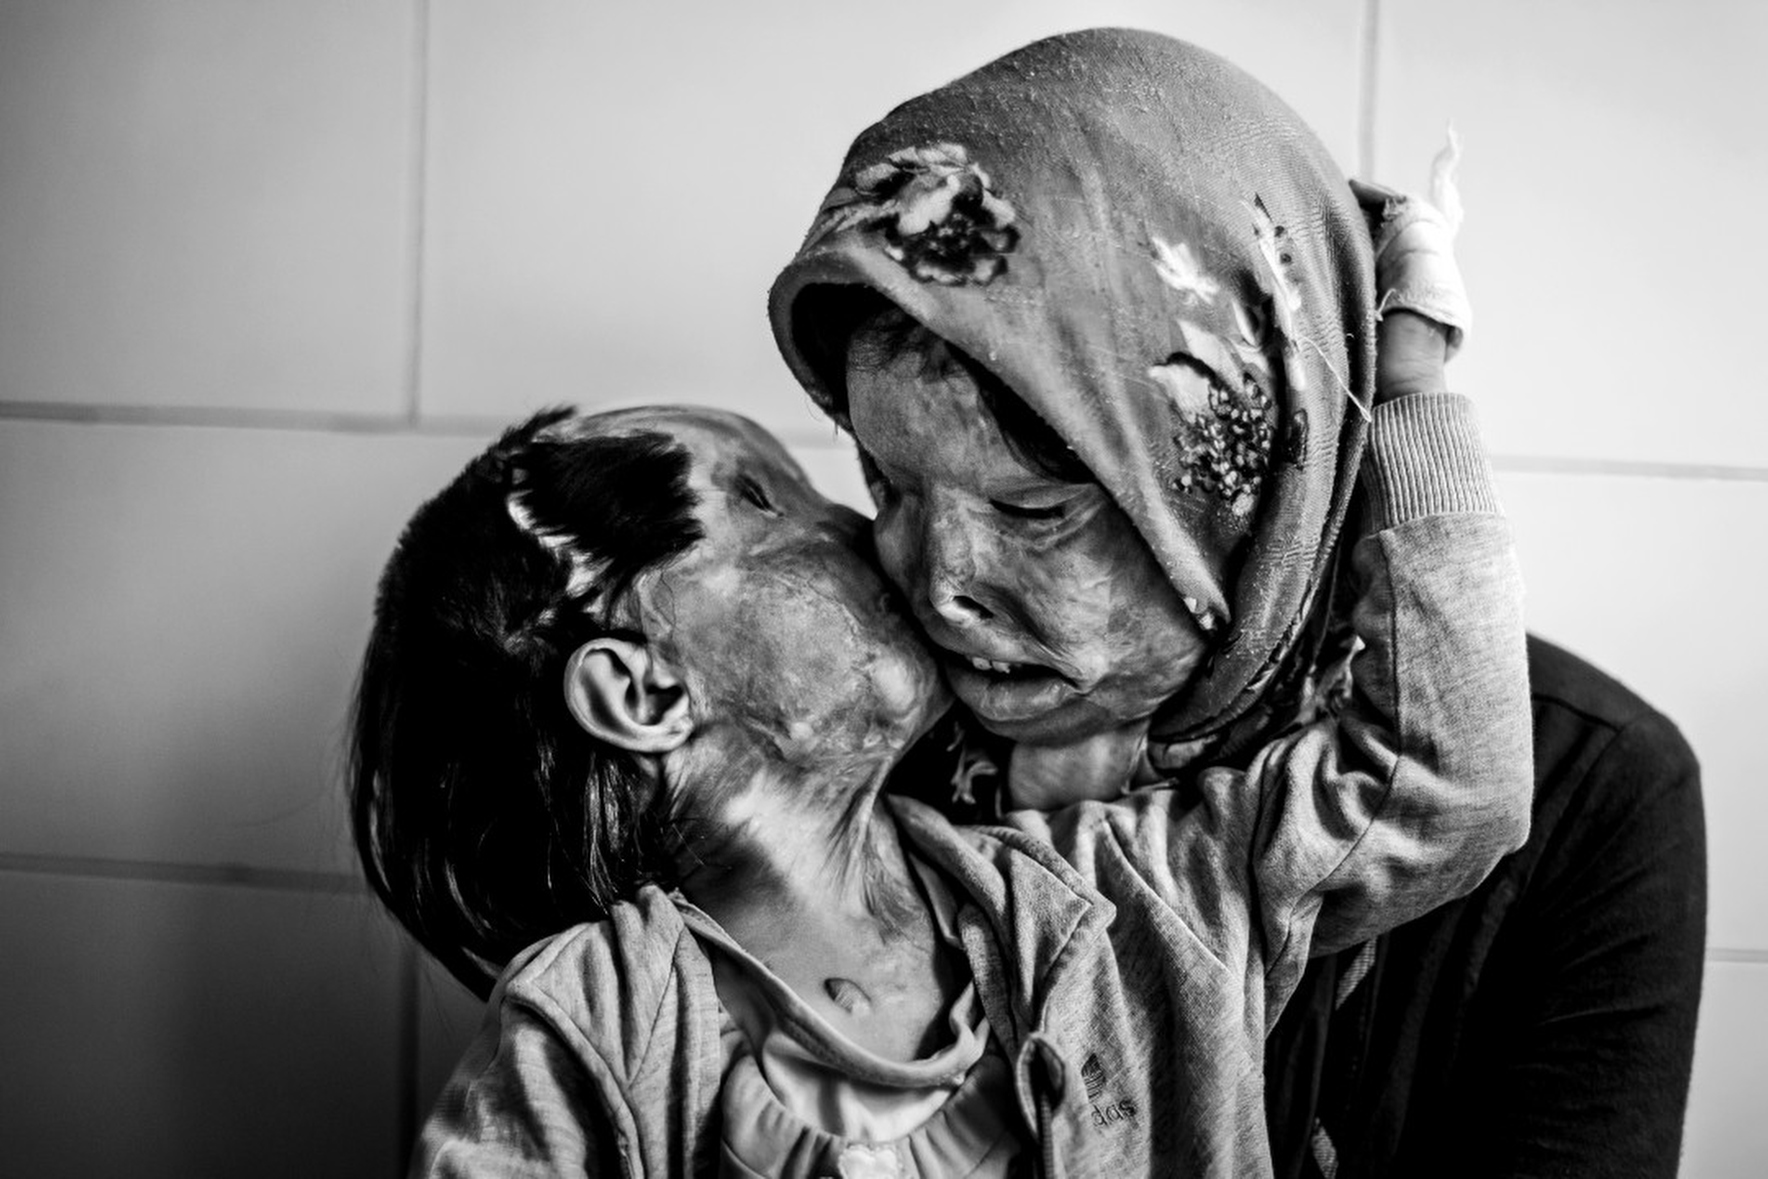 An Iranian woman and her 3 year old daughter, disfigured from an acid attack from the husband,father.